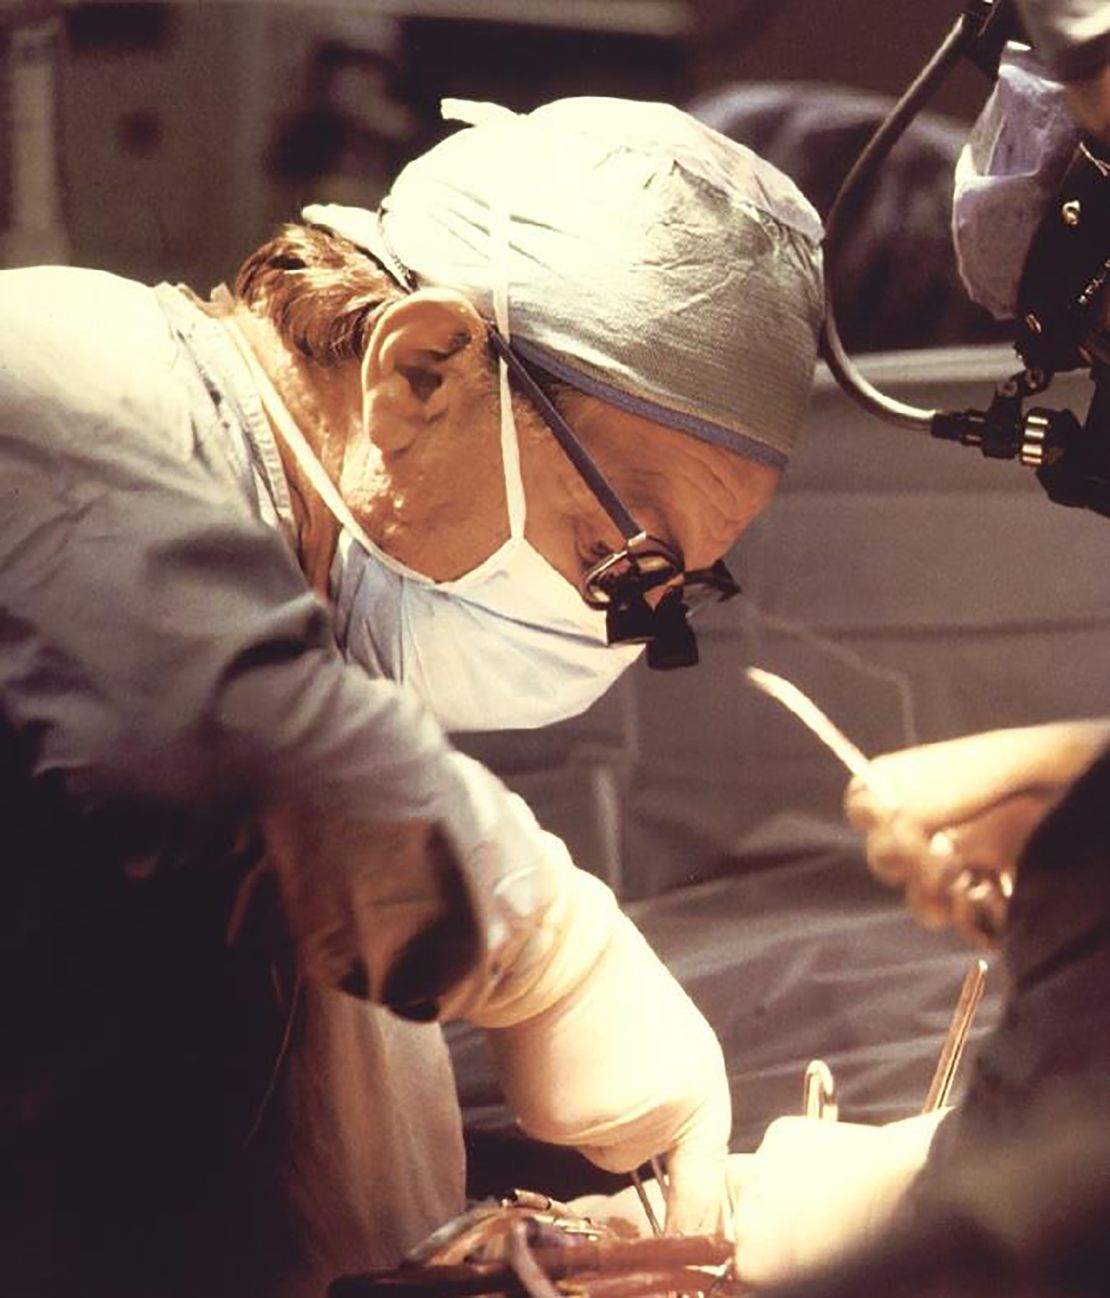 Dr. Francis Robicsek was one of the first surgeons to perform open-heart surgeries in Charlotte, North Carolina. 